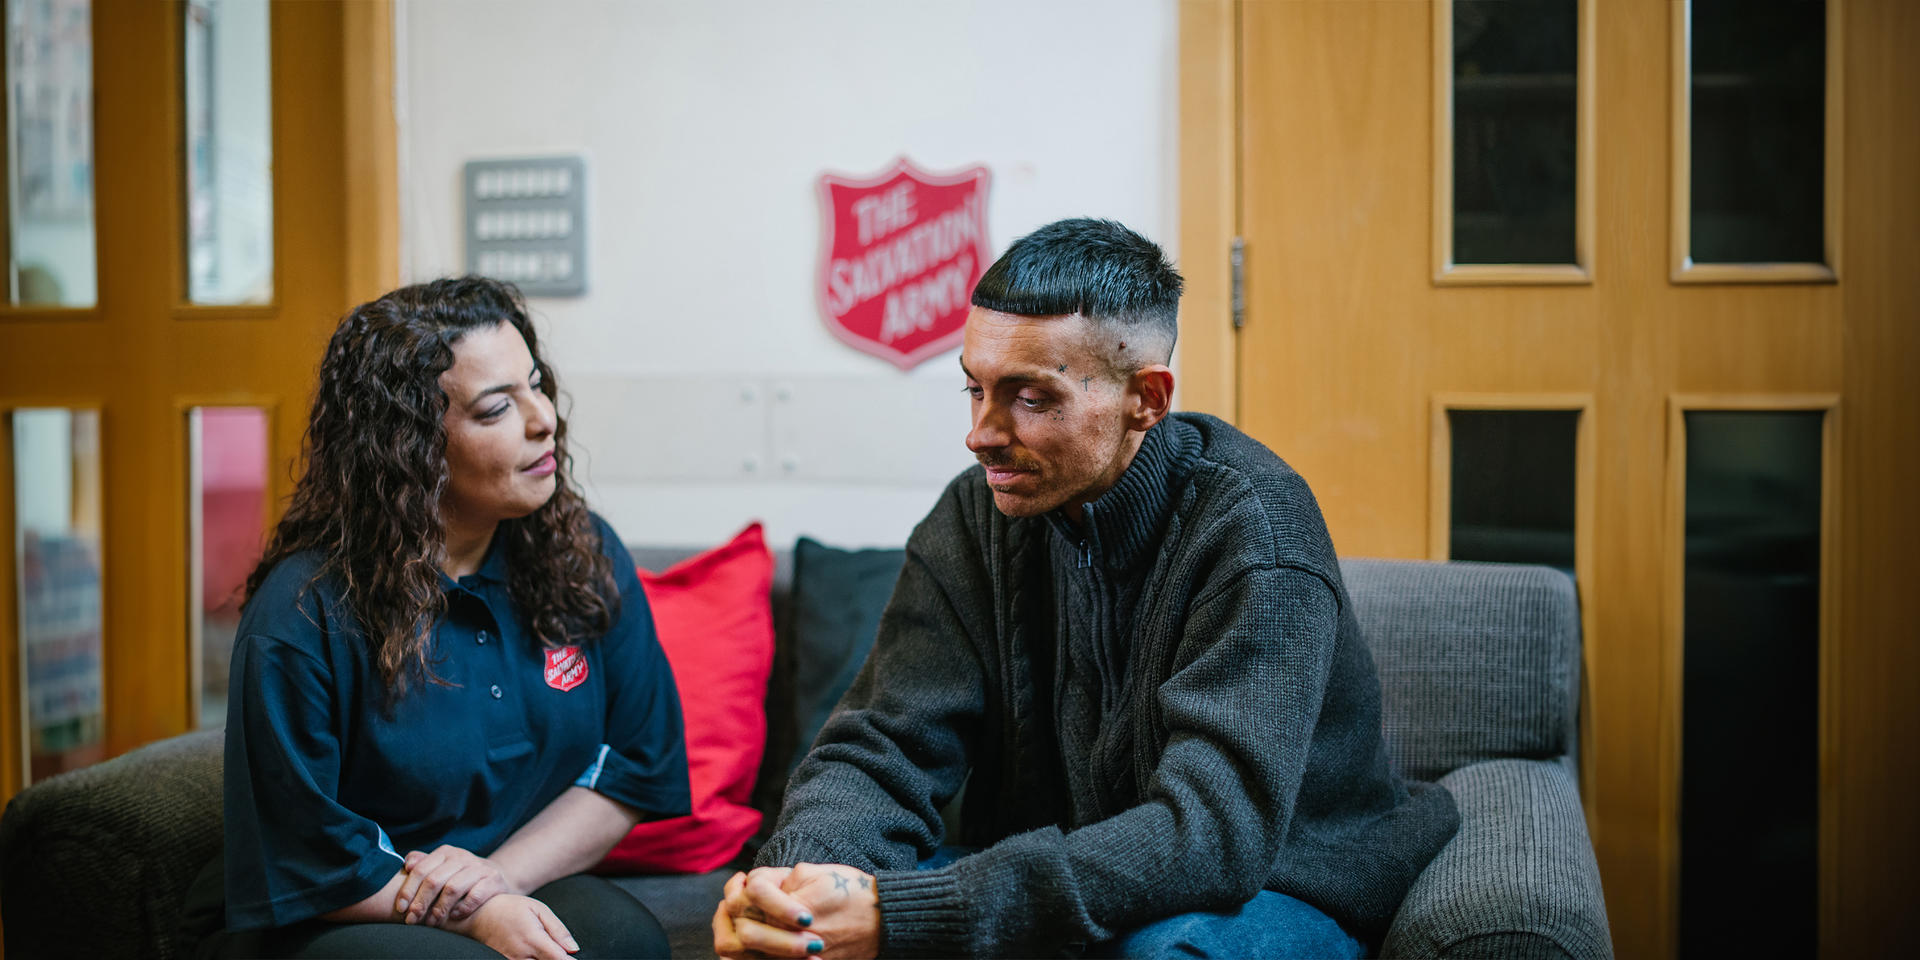 A Salvation Army volunteer/staff member talking with Max on a grey sofa inside a Salvation Army building.